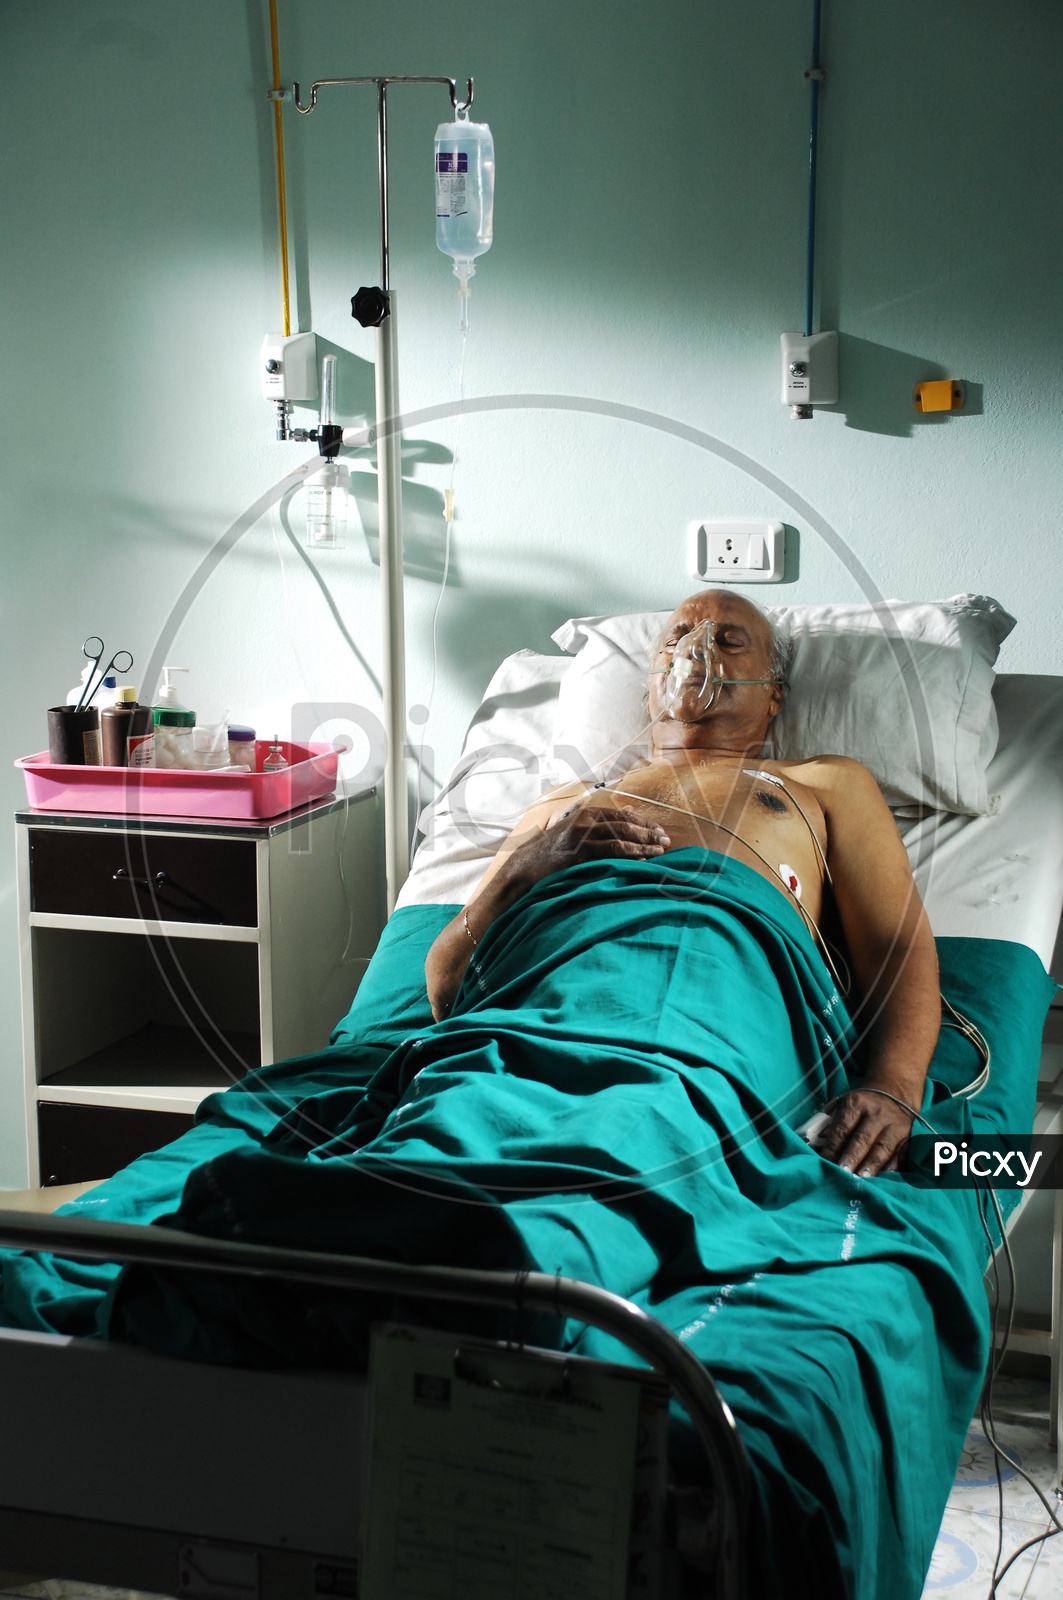 An old man in a hospital bed with oxygen mask and saline